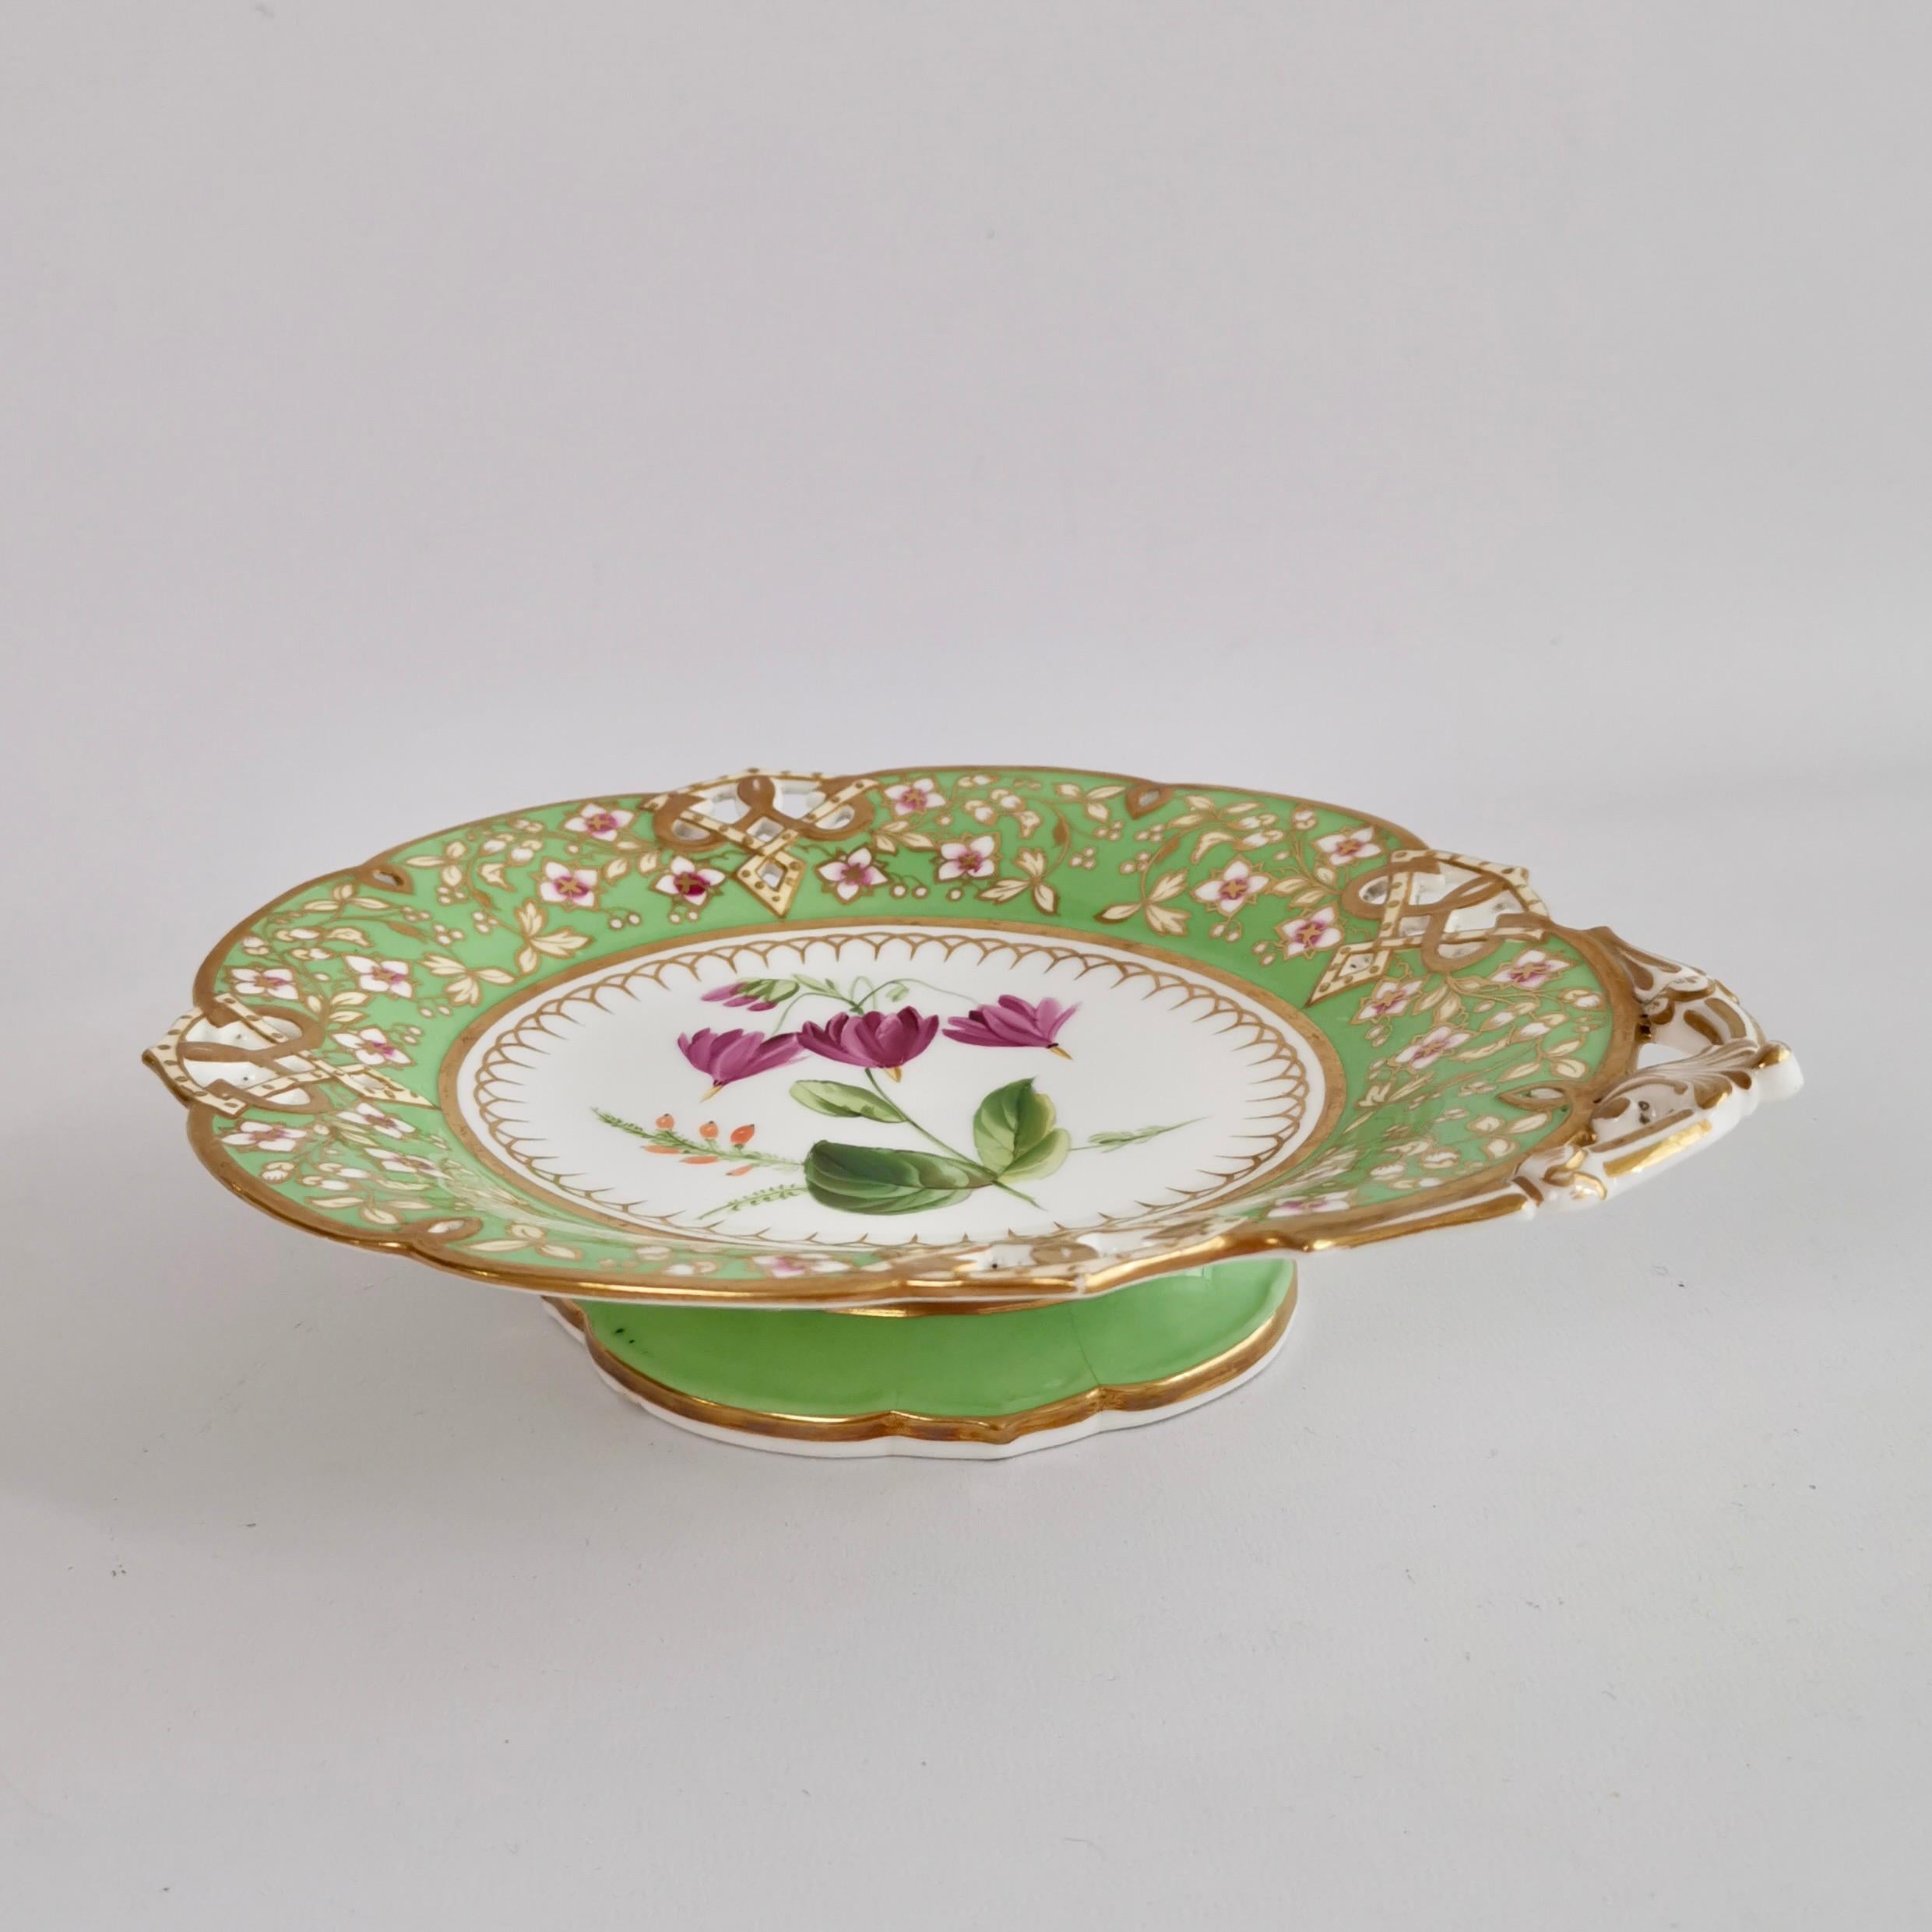 English Samuel Alcock Low Comport, Green with Flowers, Pierced Persian Revival ca 1855